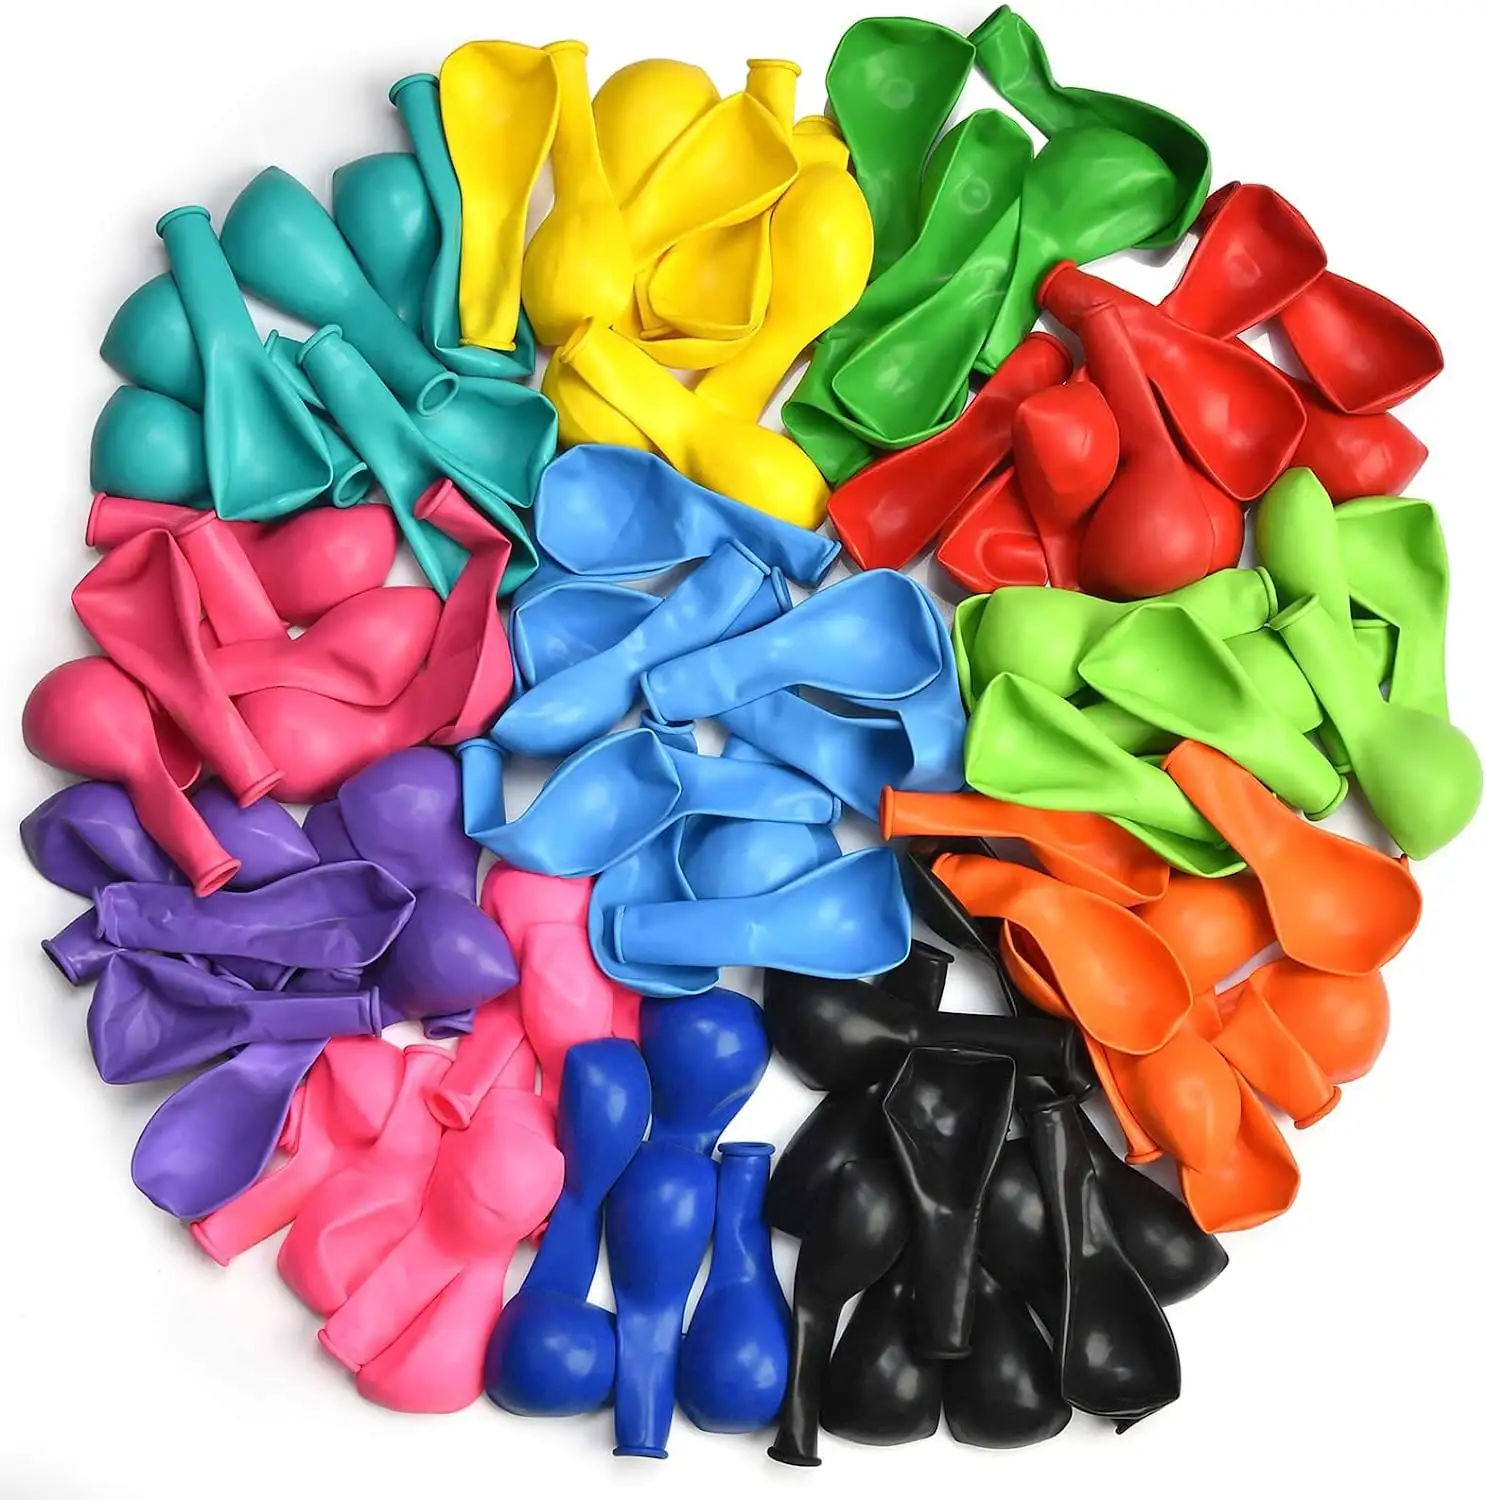 100 PCS Party Balloons 12 Inches Premium Assorted Colorful Balloons Bulk Pack of Strong Latex Balloons